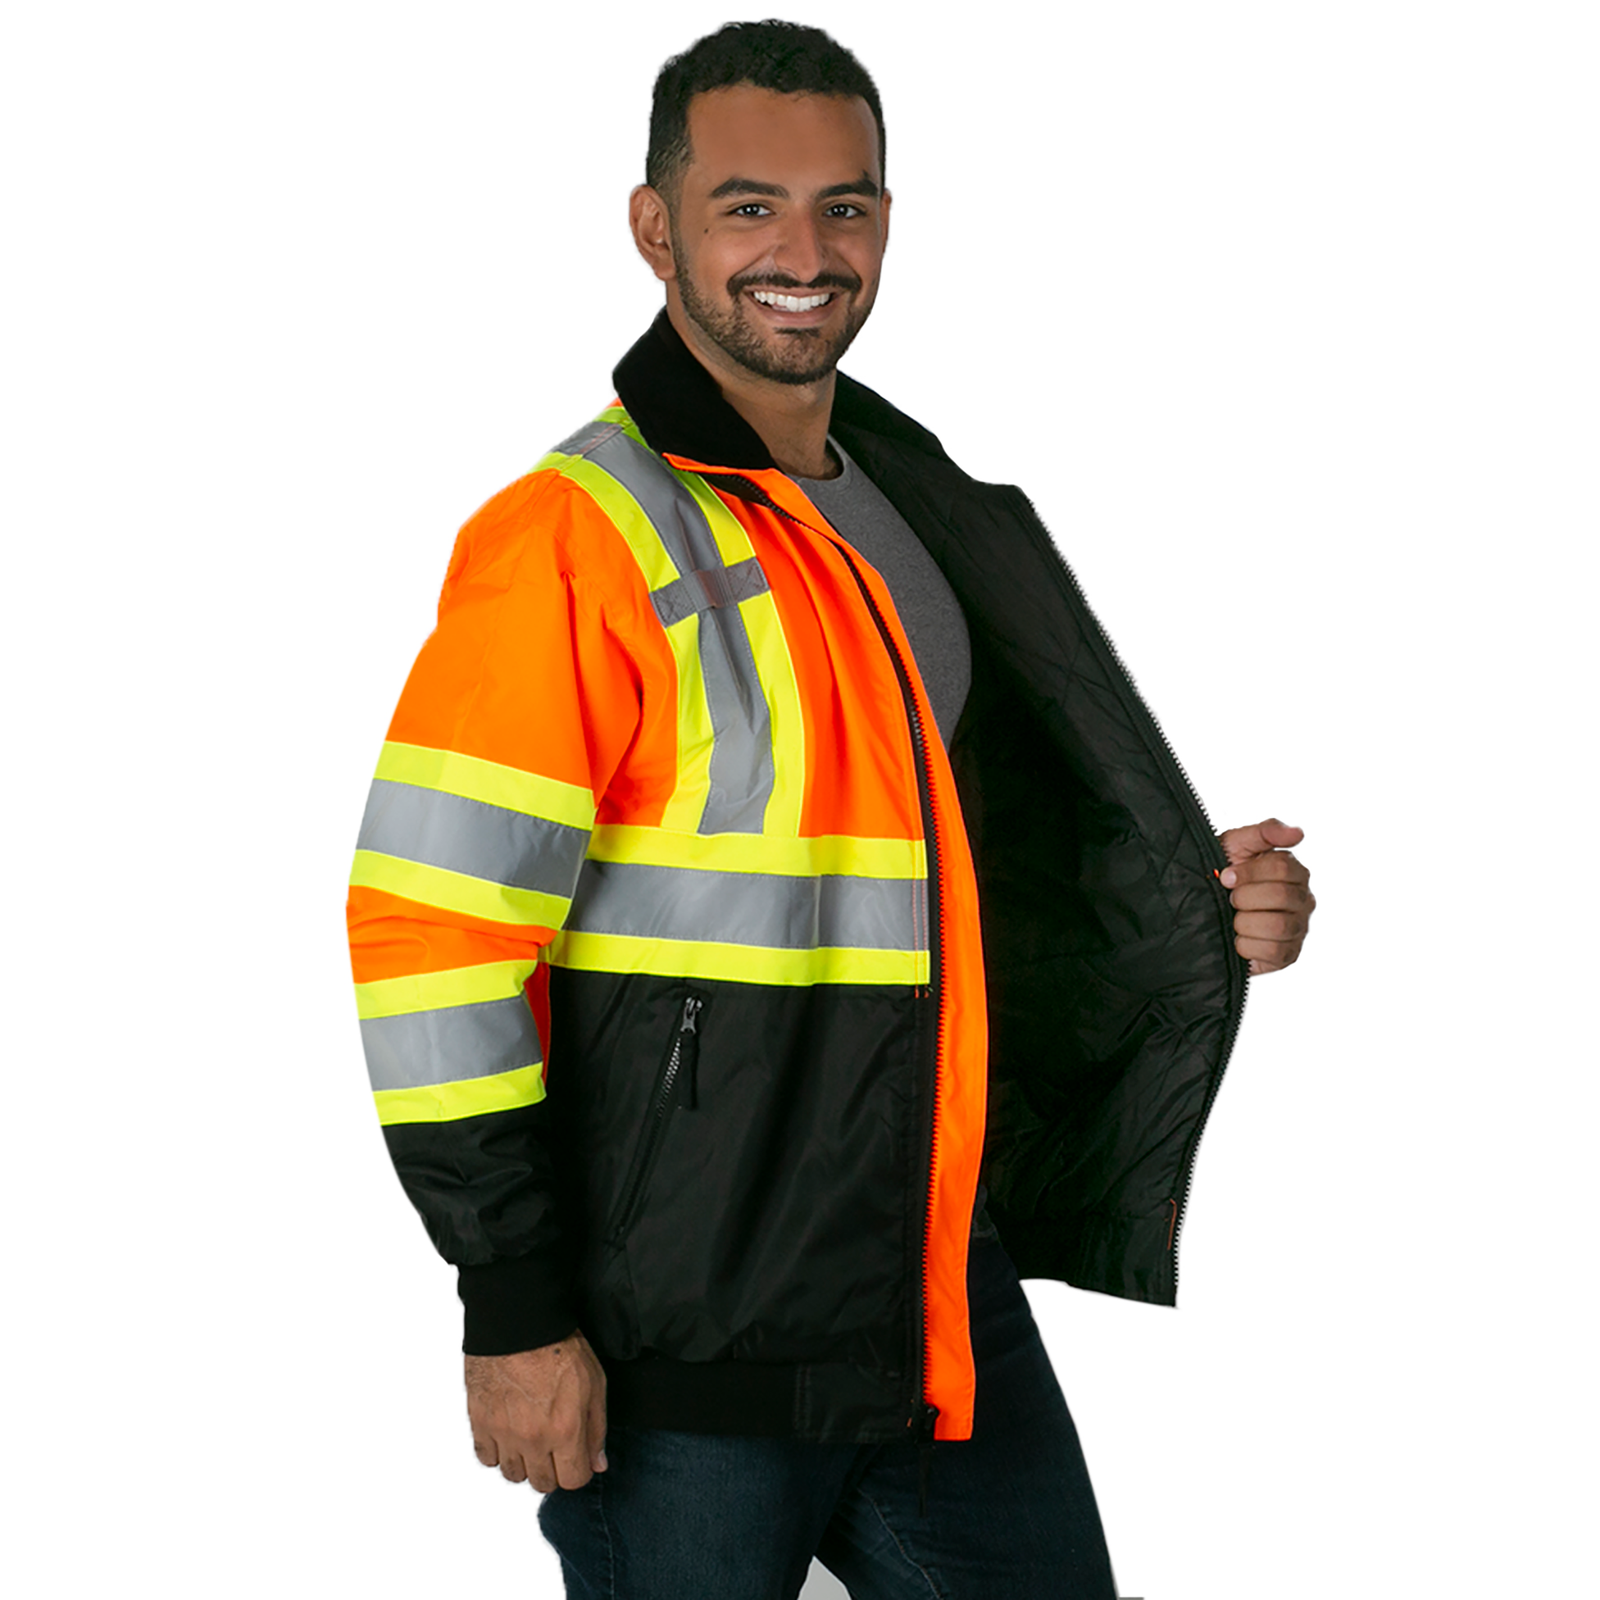 Man wearing the orange JORESTECH Hi-vis two tone safety bomber jacket with reflective stripes and a reflective X on the back